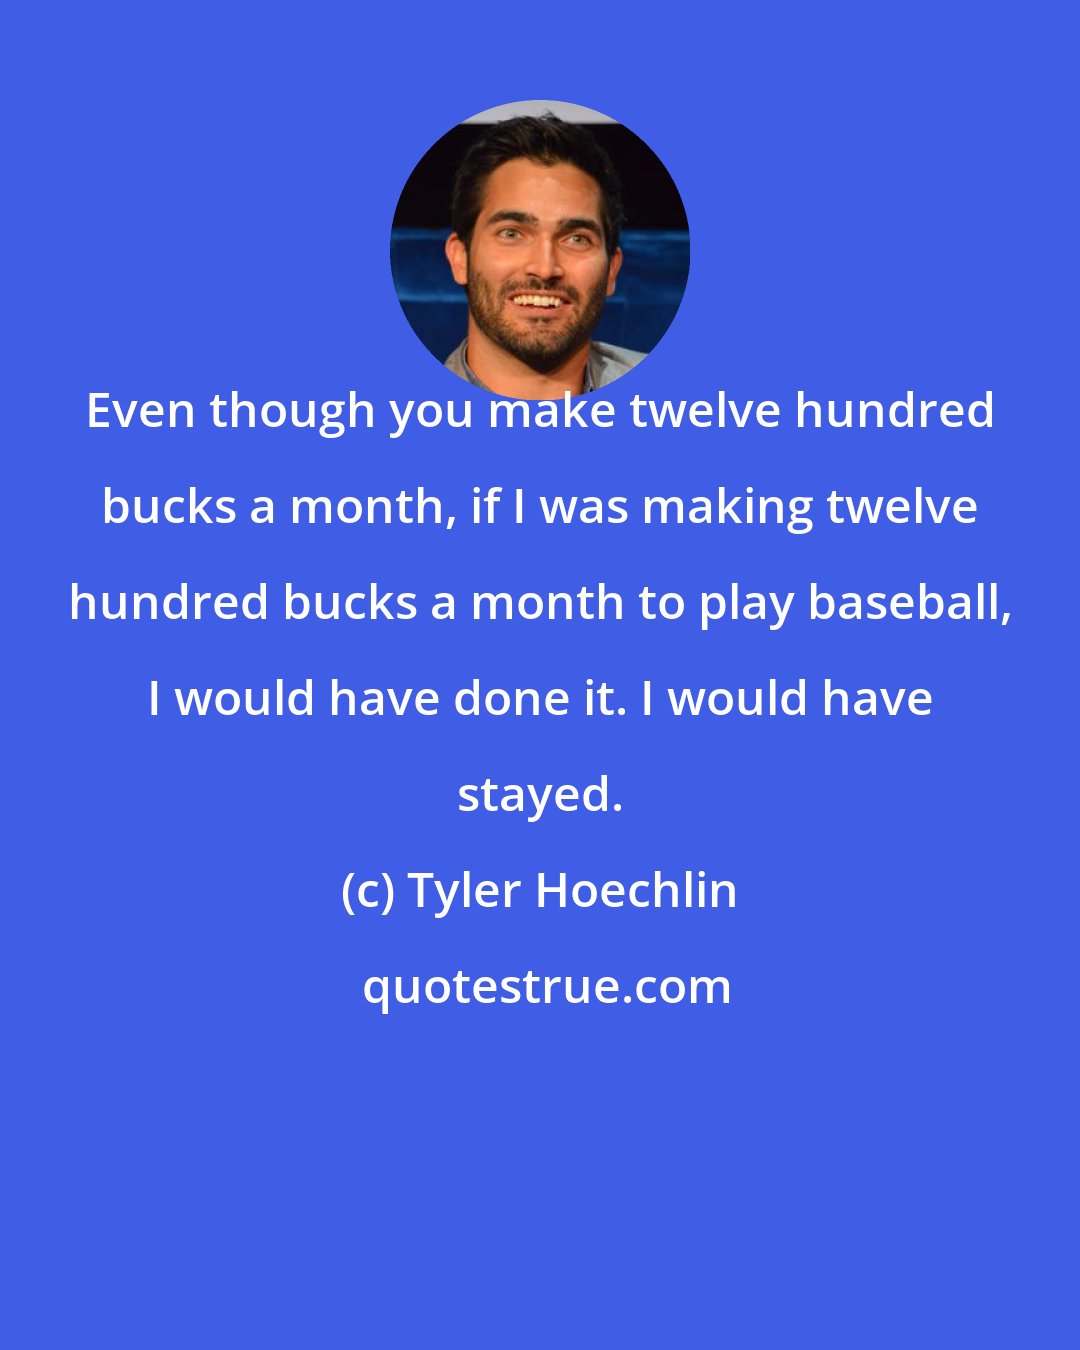 Tyler Hoechlin: Even though you make twelve hundred bucks a month, if I was making twelve hundred bucks a month to play baseball, I would have done it. I would have stayed.